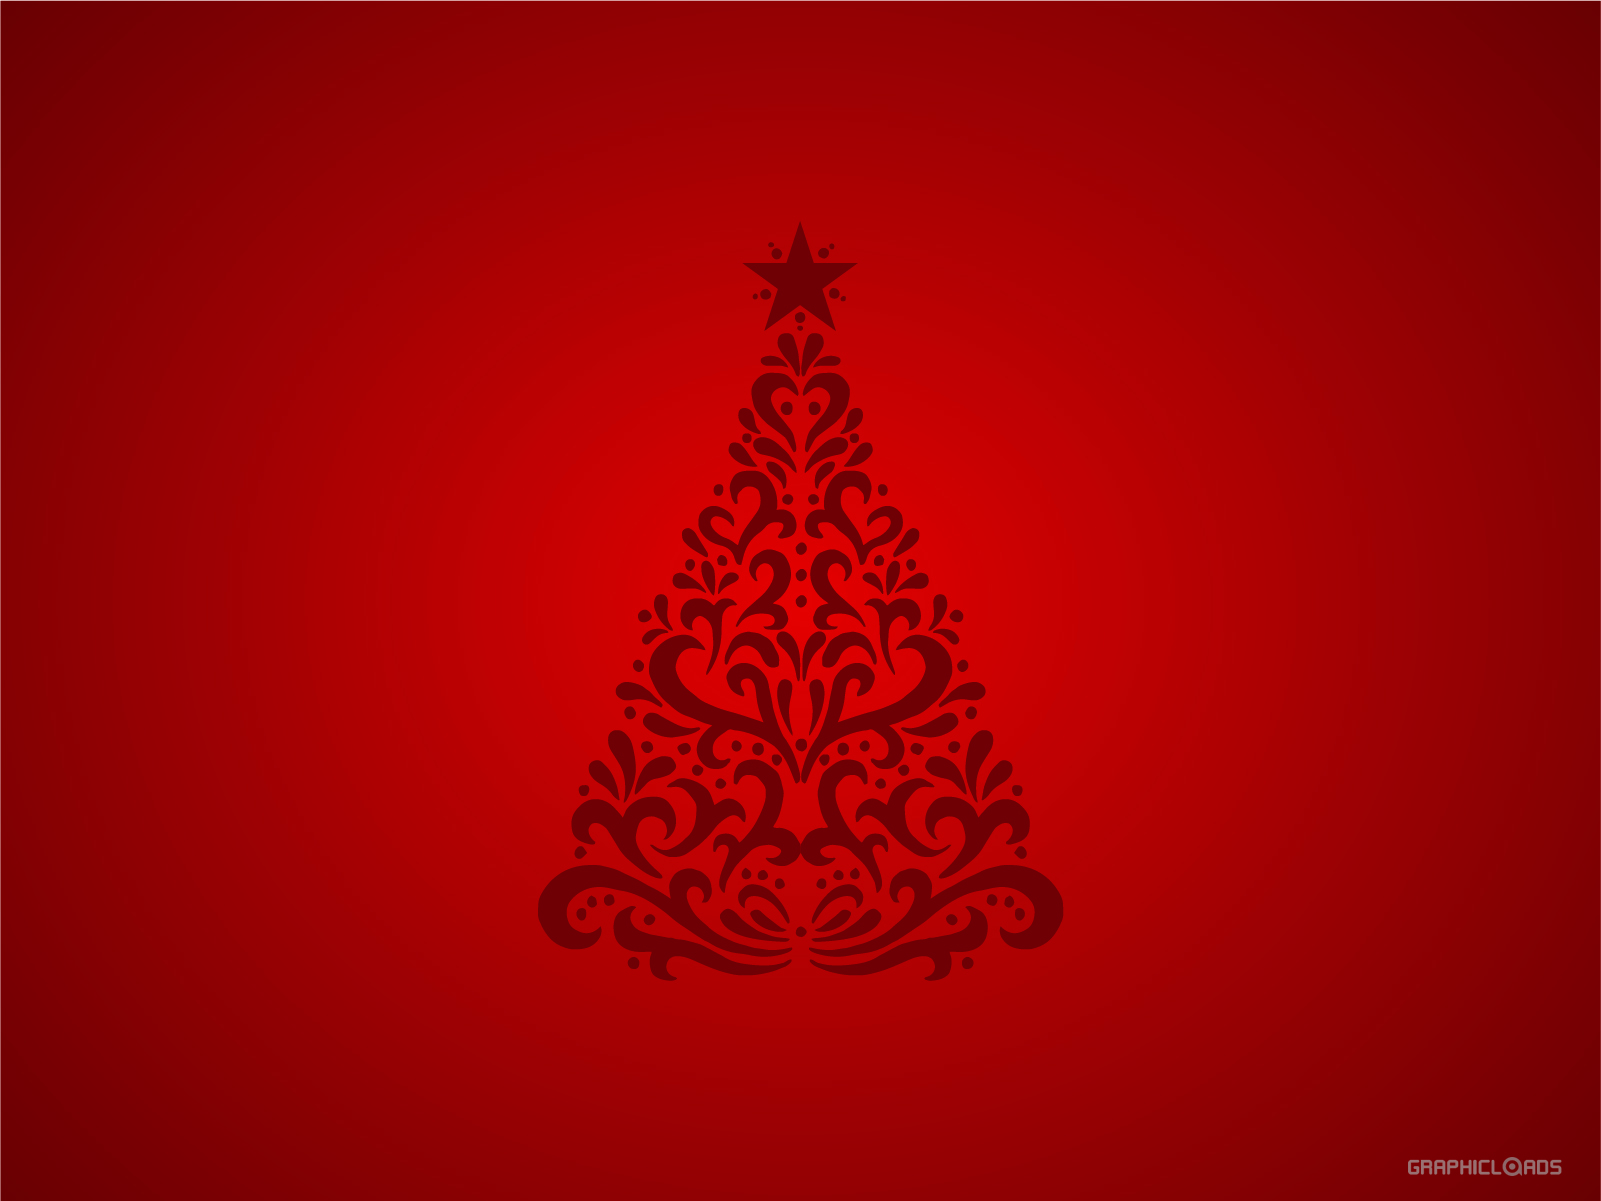 15 High Quality Christmas Wallpapers 2015   GraphicLoads